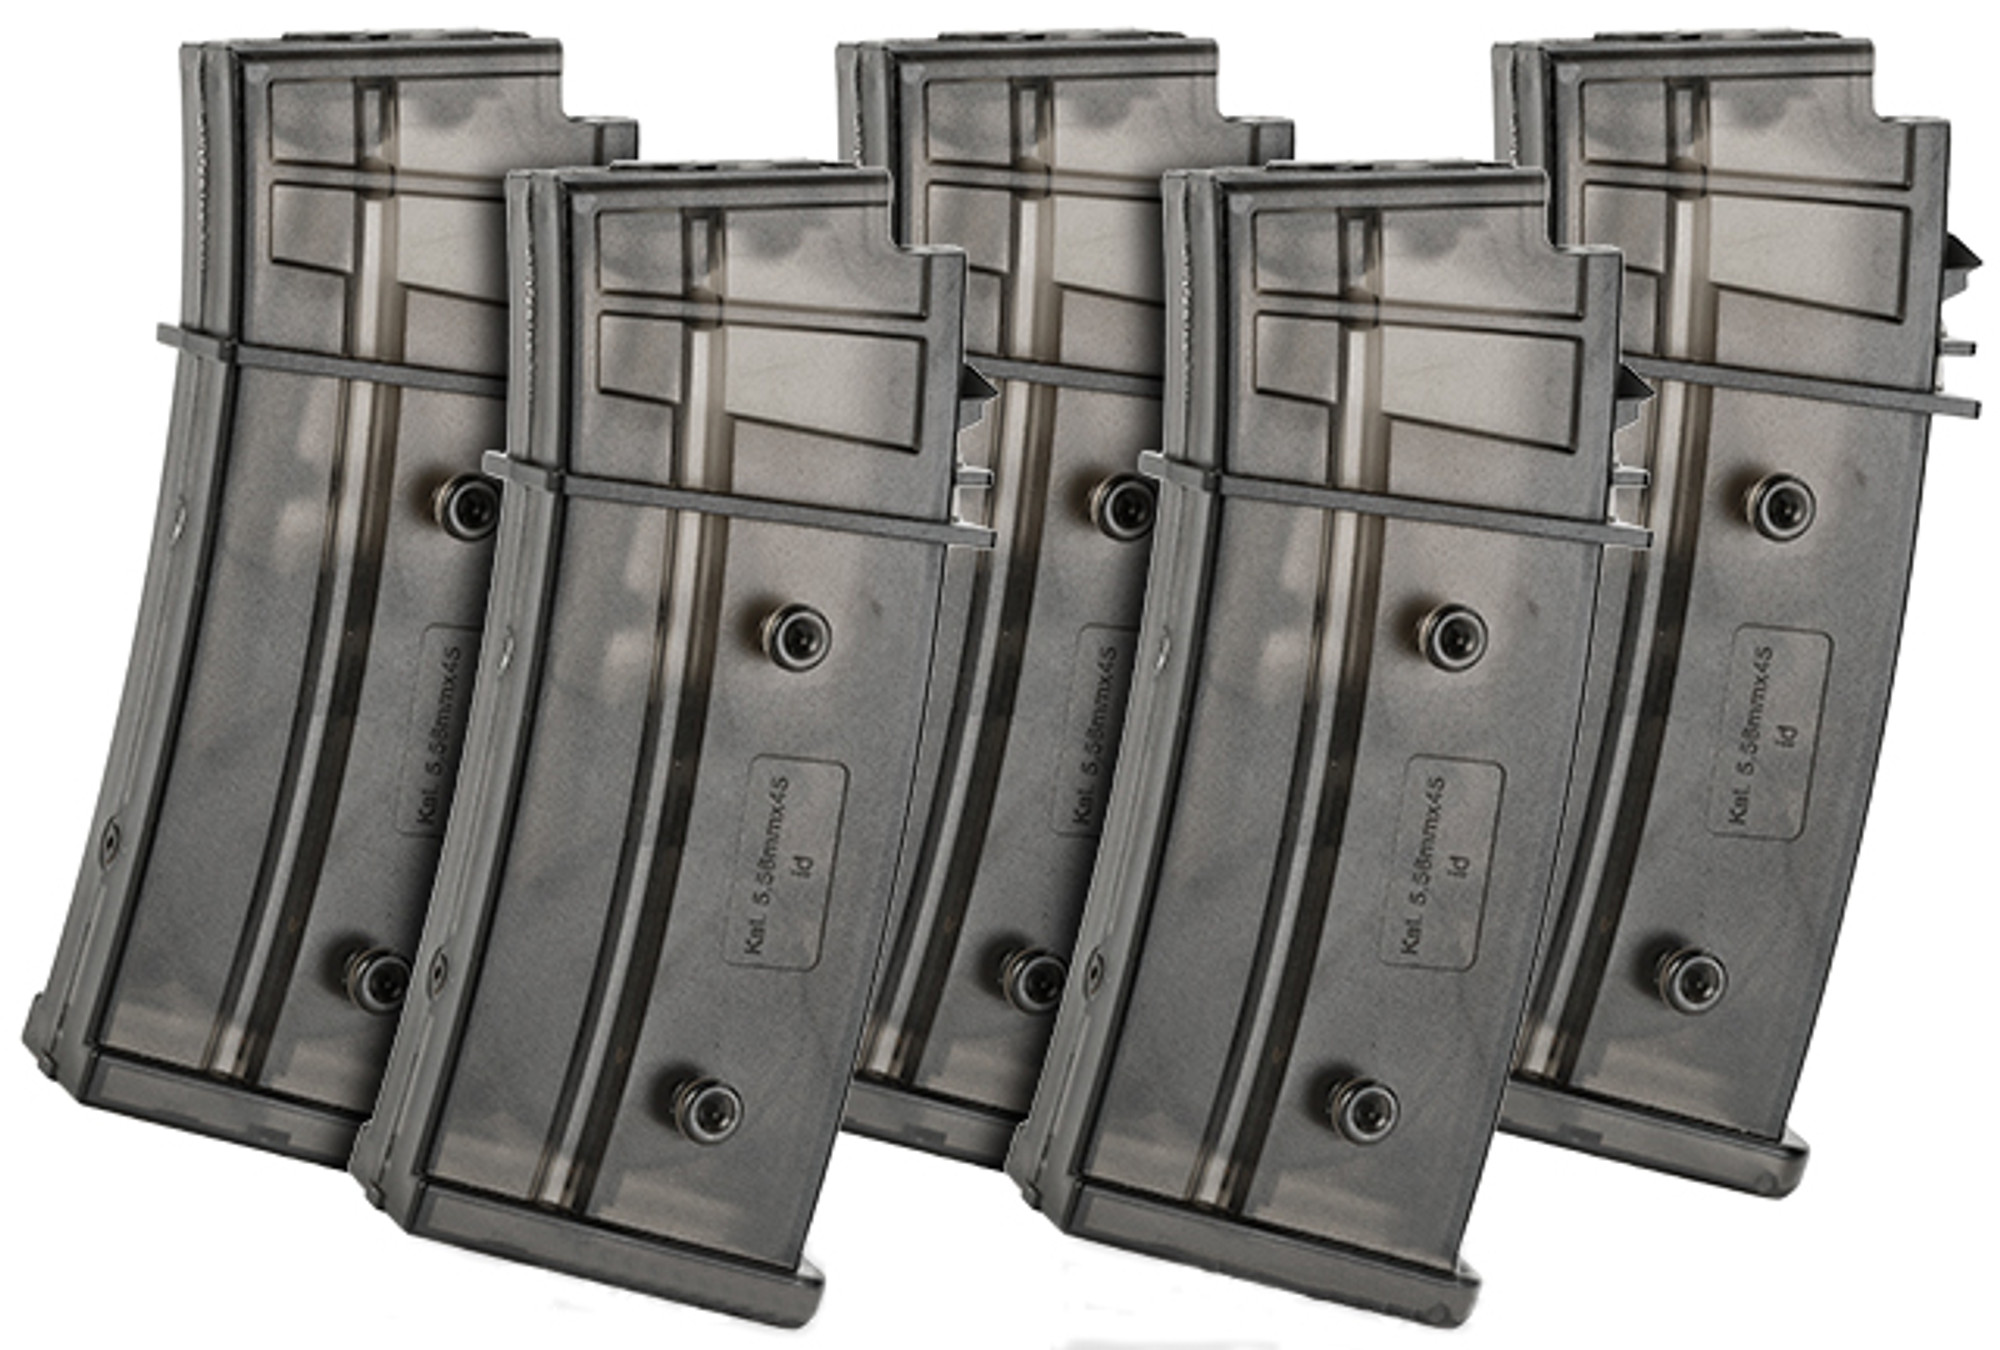 6mmProShop 300rd FlashMag Hi-Cap Magazine for G36 Series Airsoft AEG Rifles by UFC (Package: Set of 5)